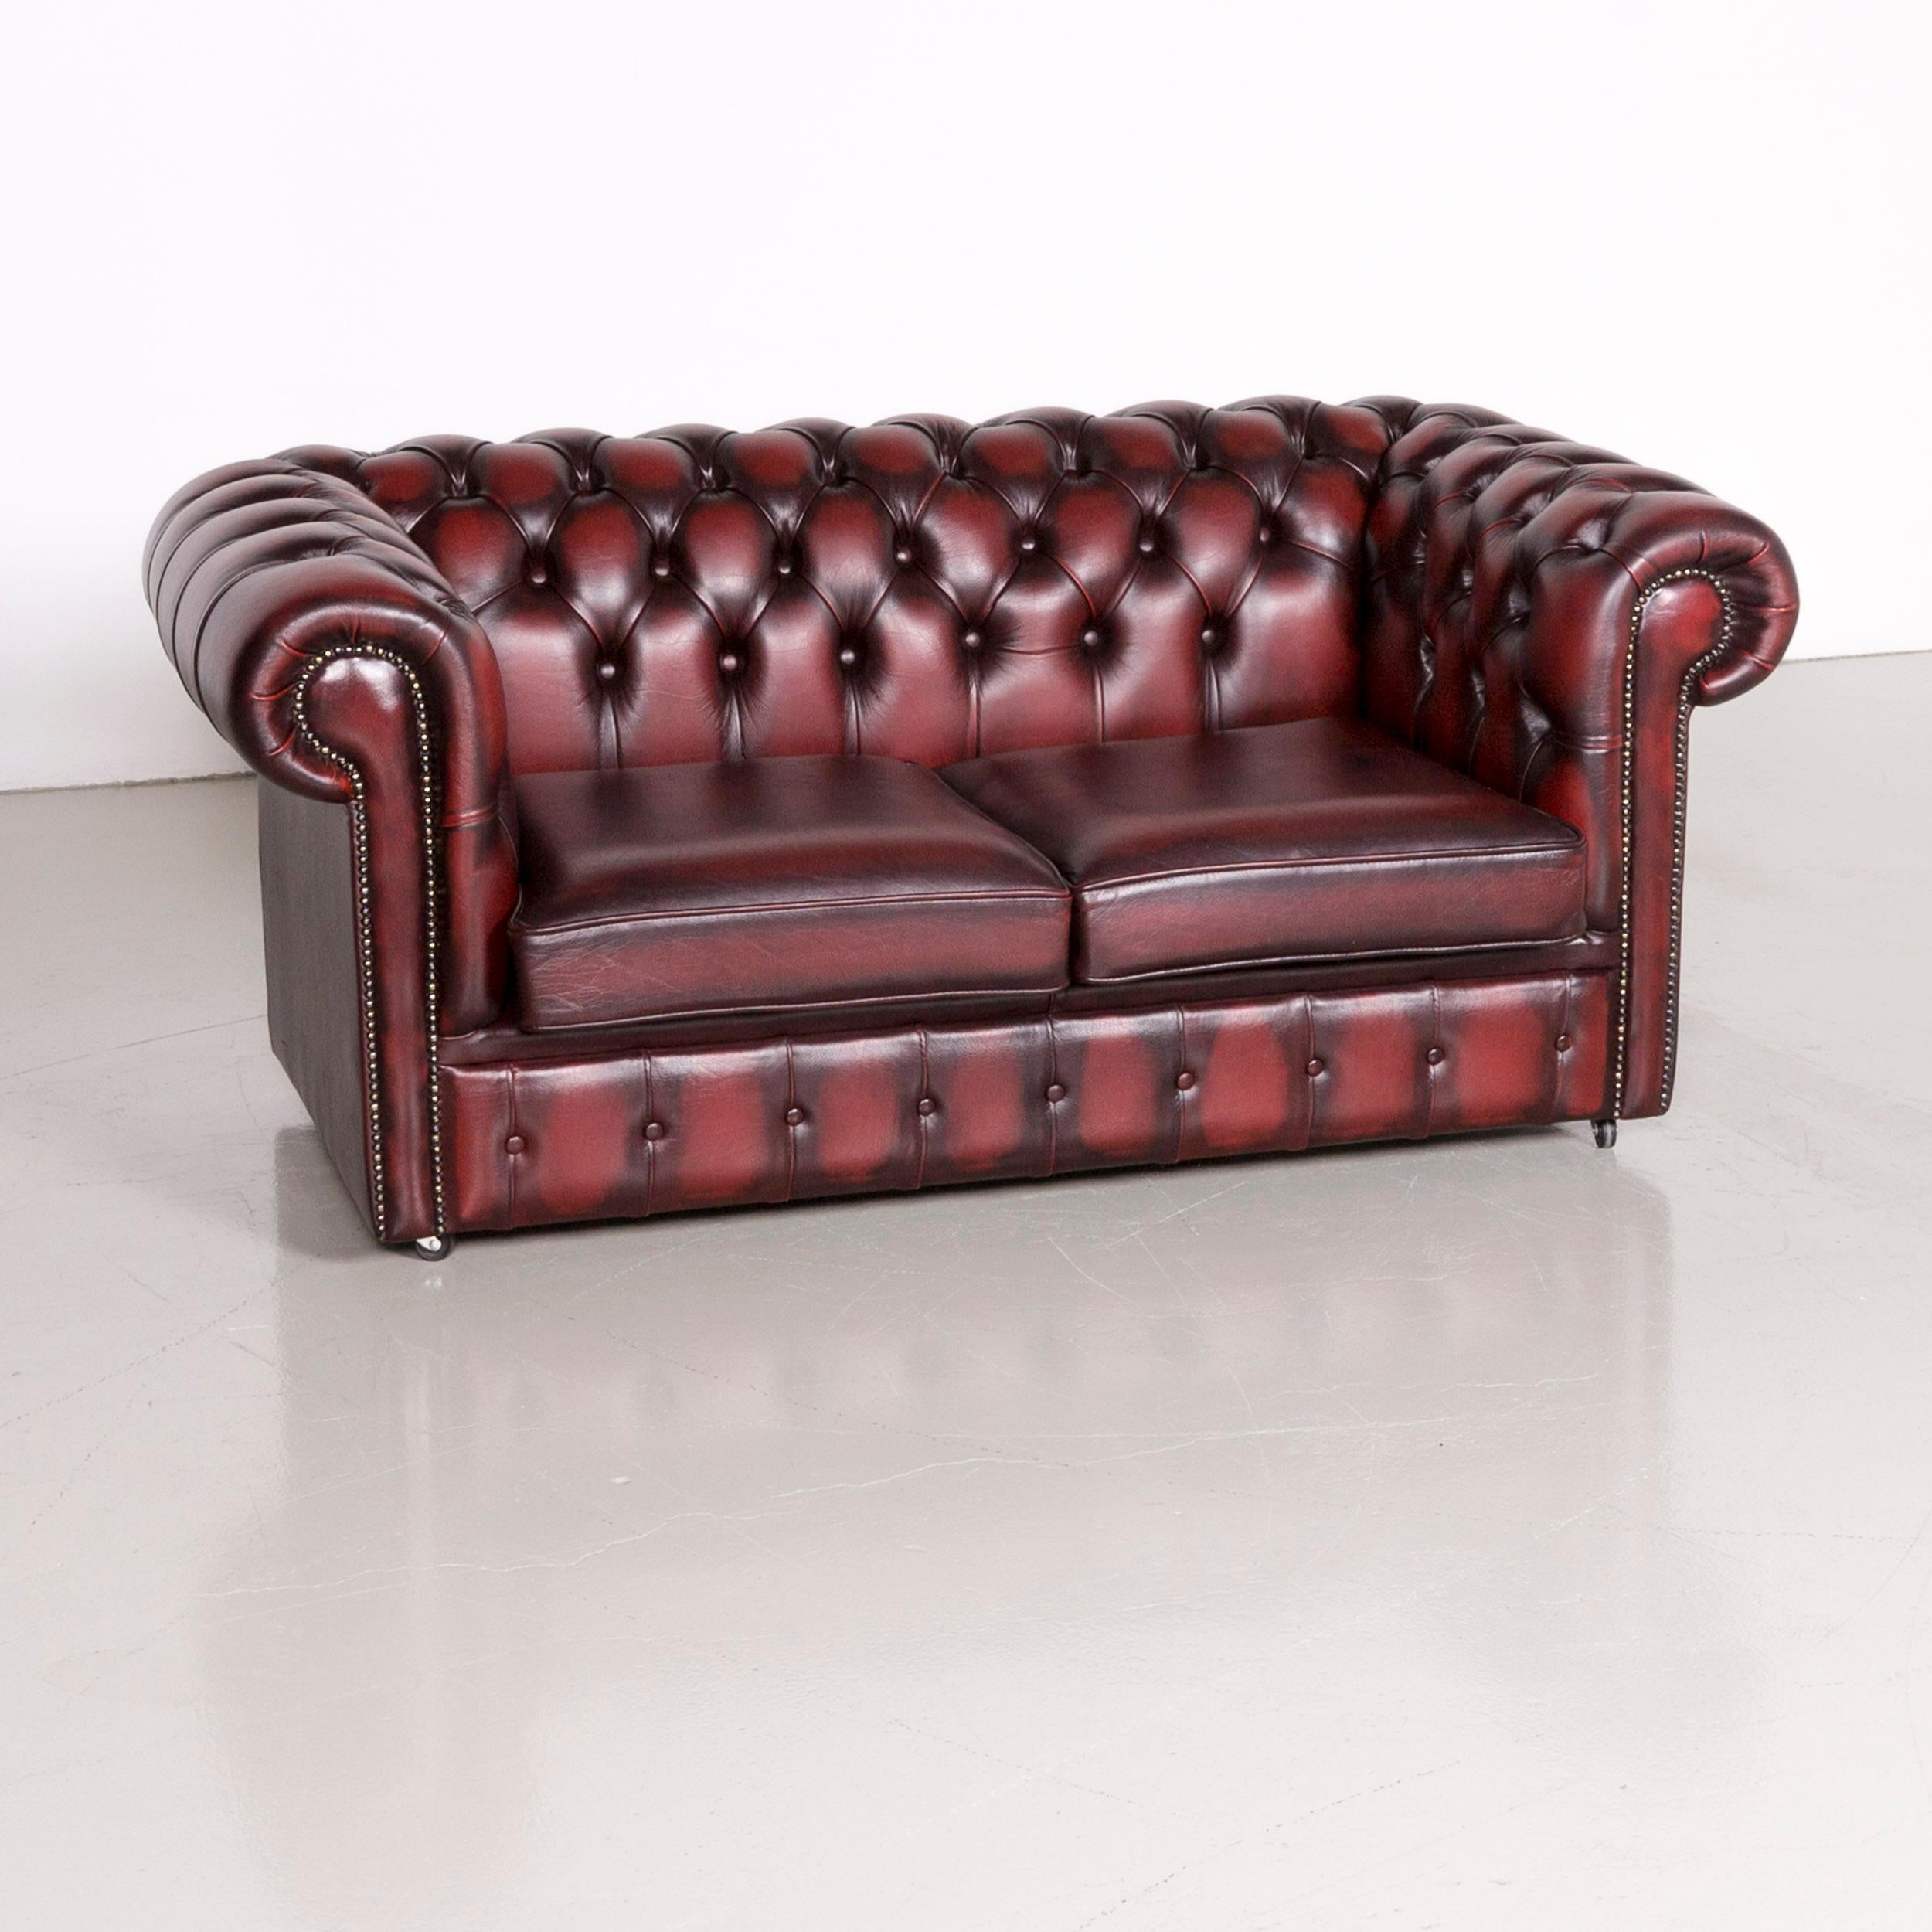 red chesterfield 2 seater sofa